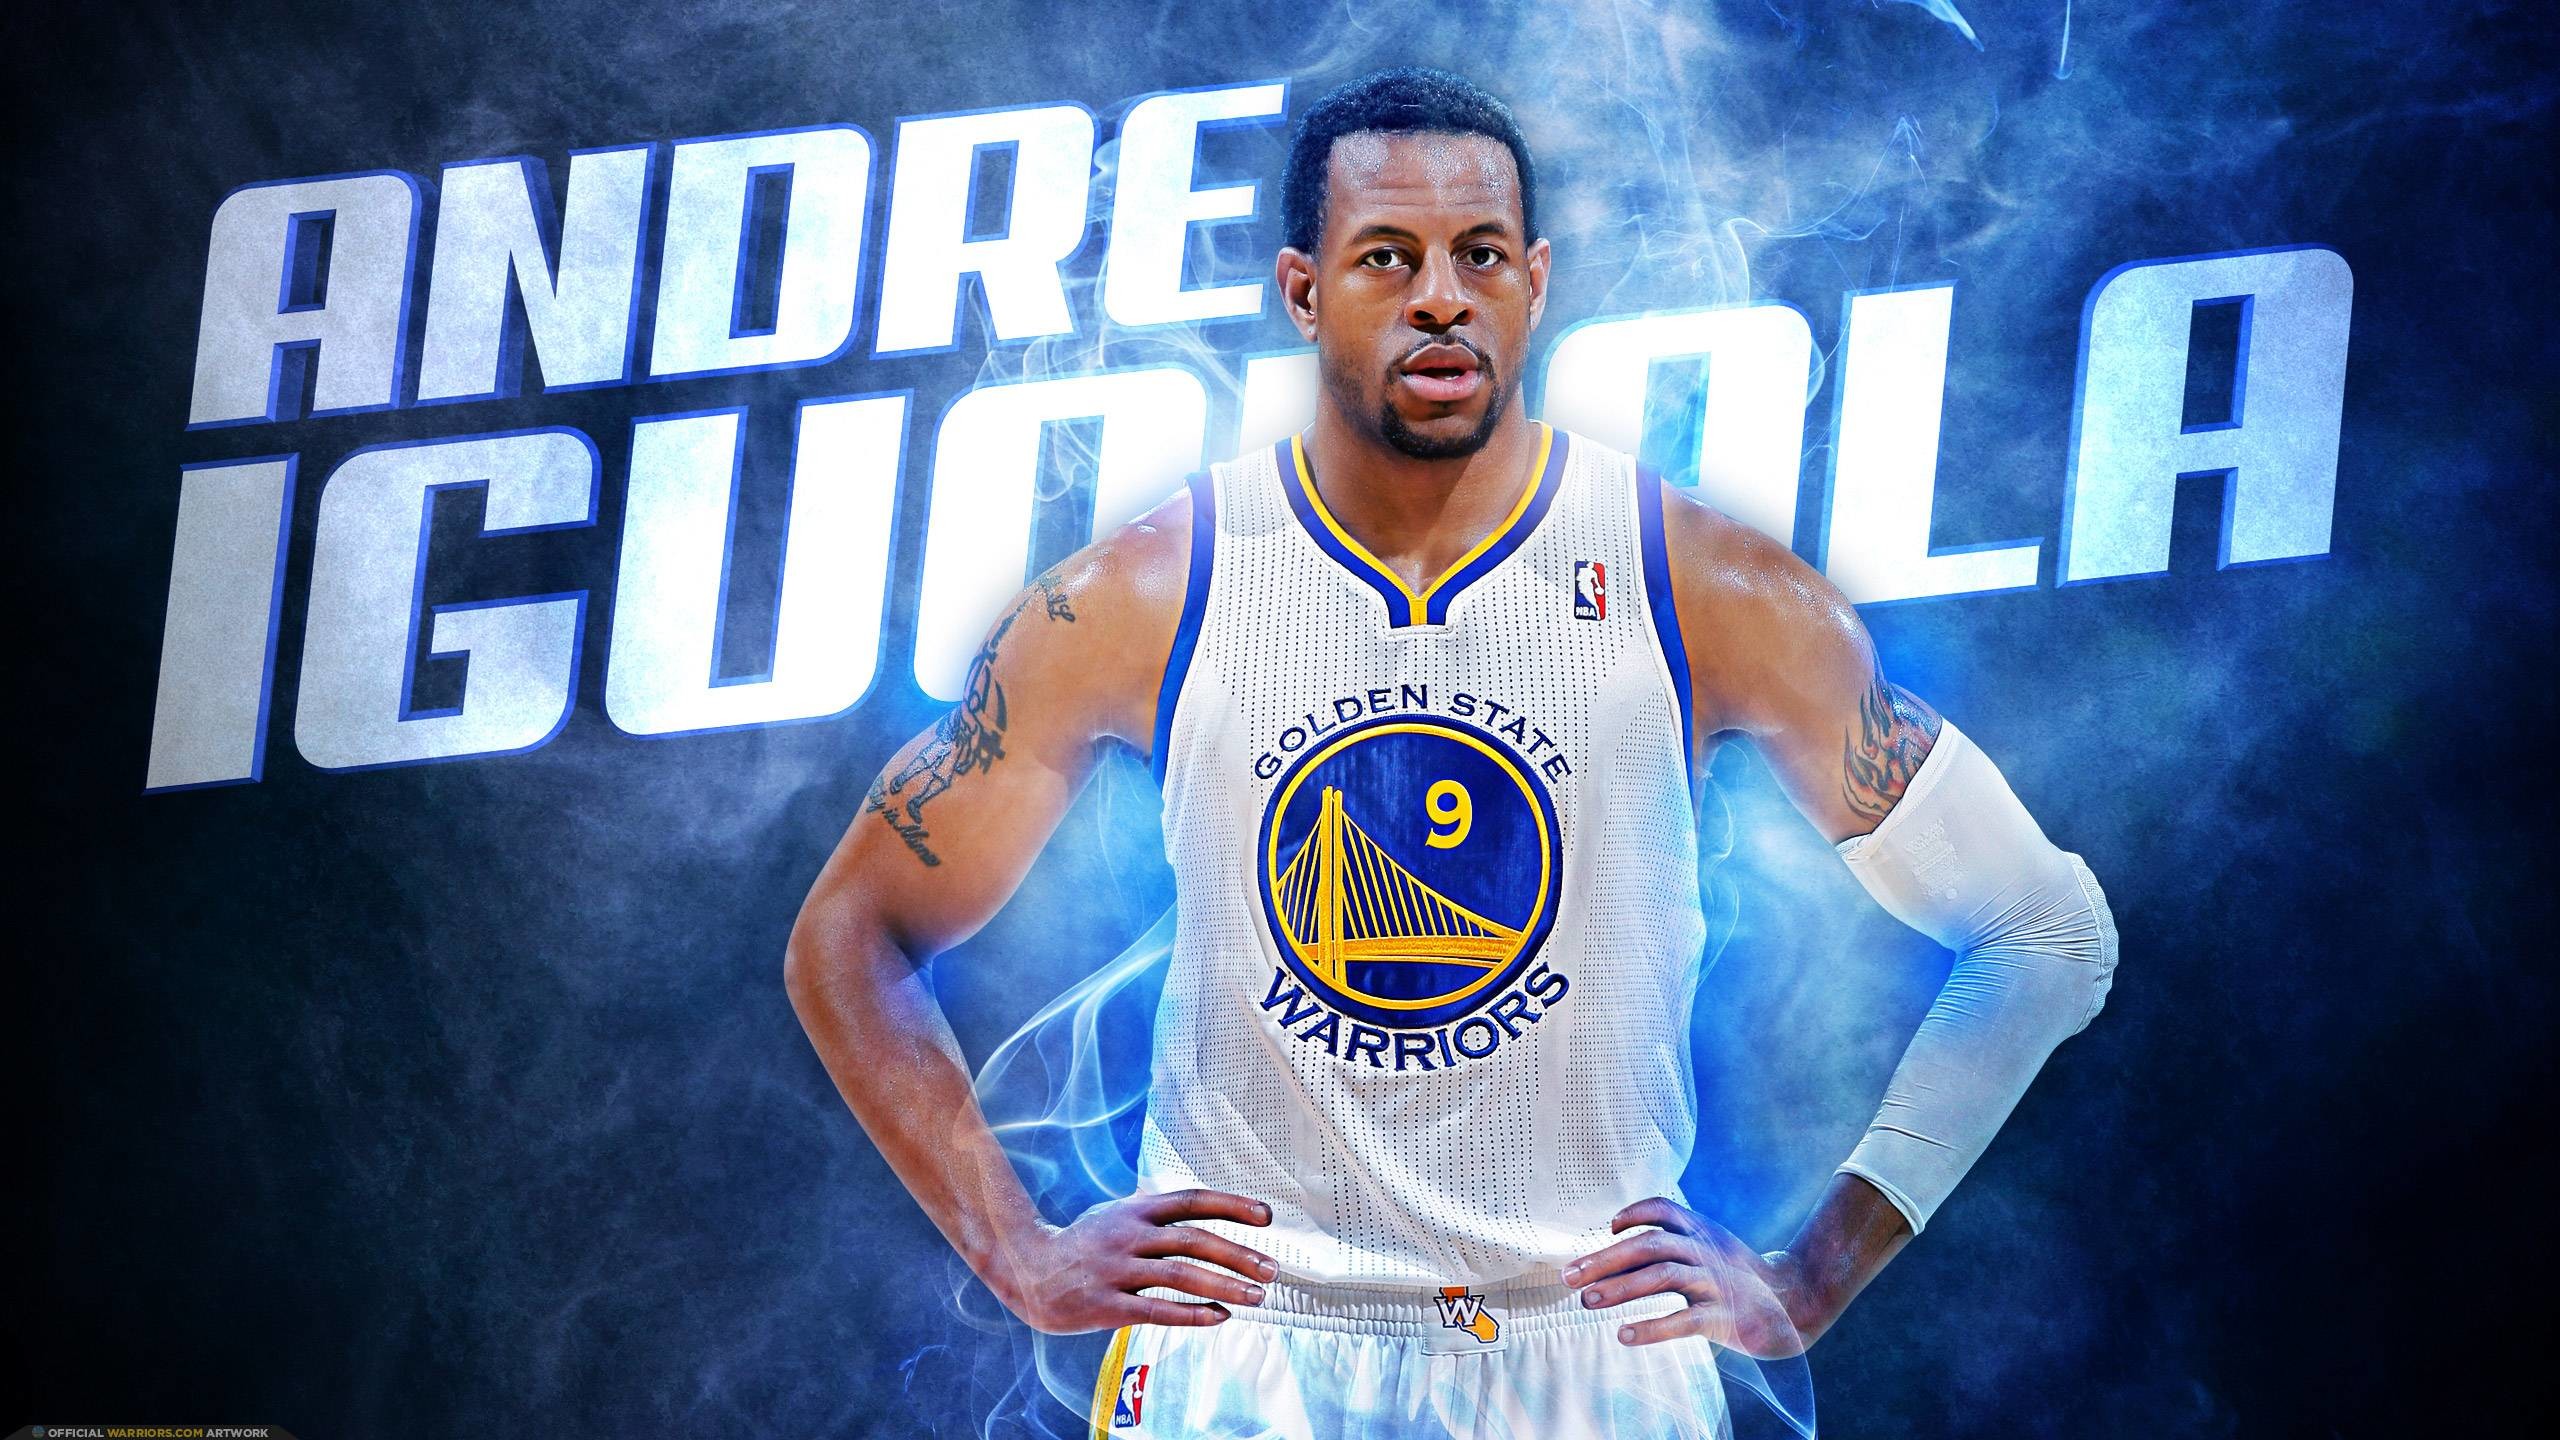 Andre Iguodala Wallpaper Pictures